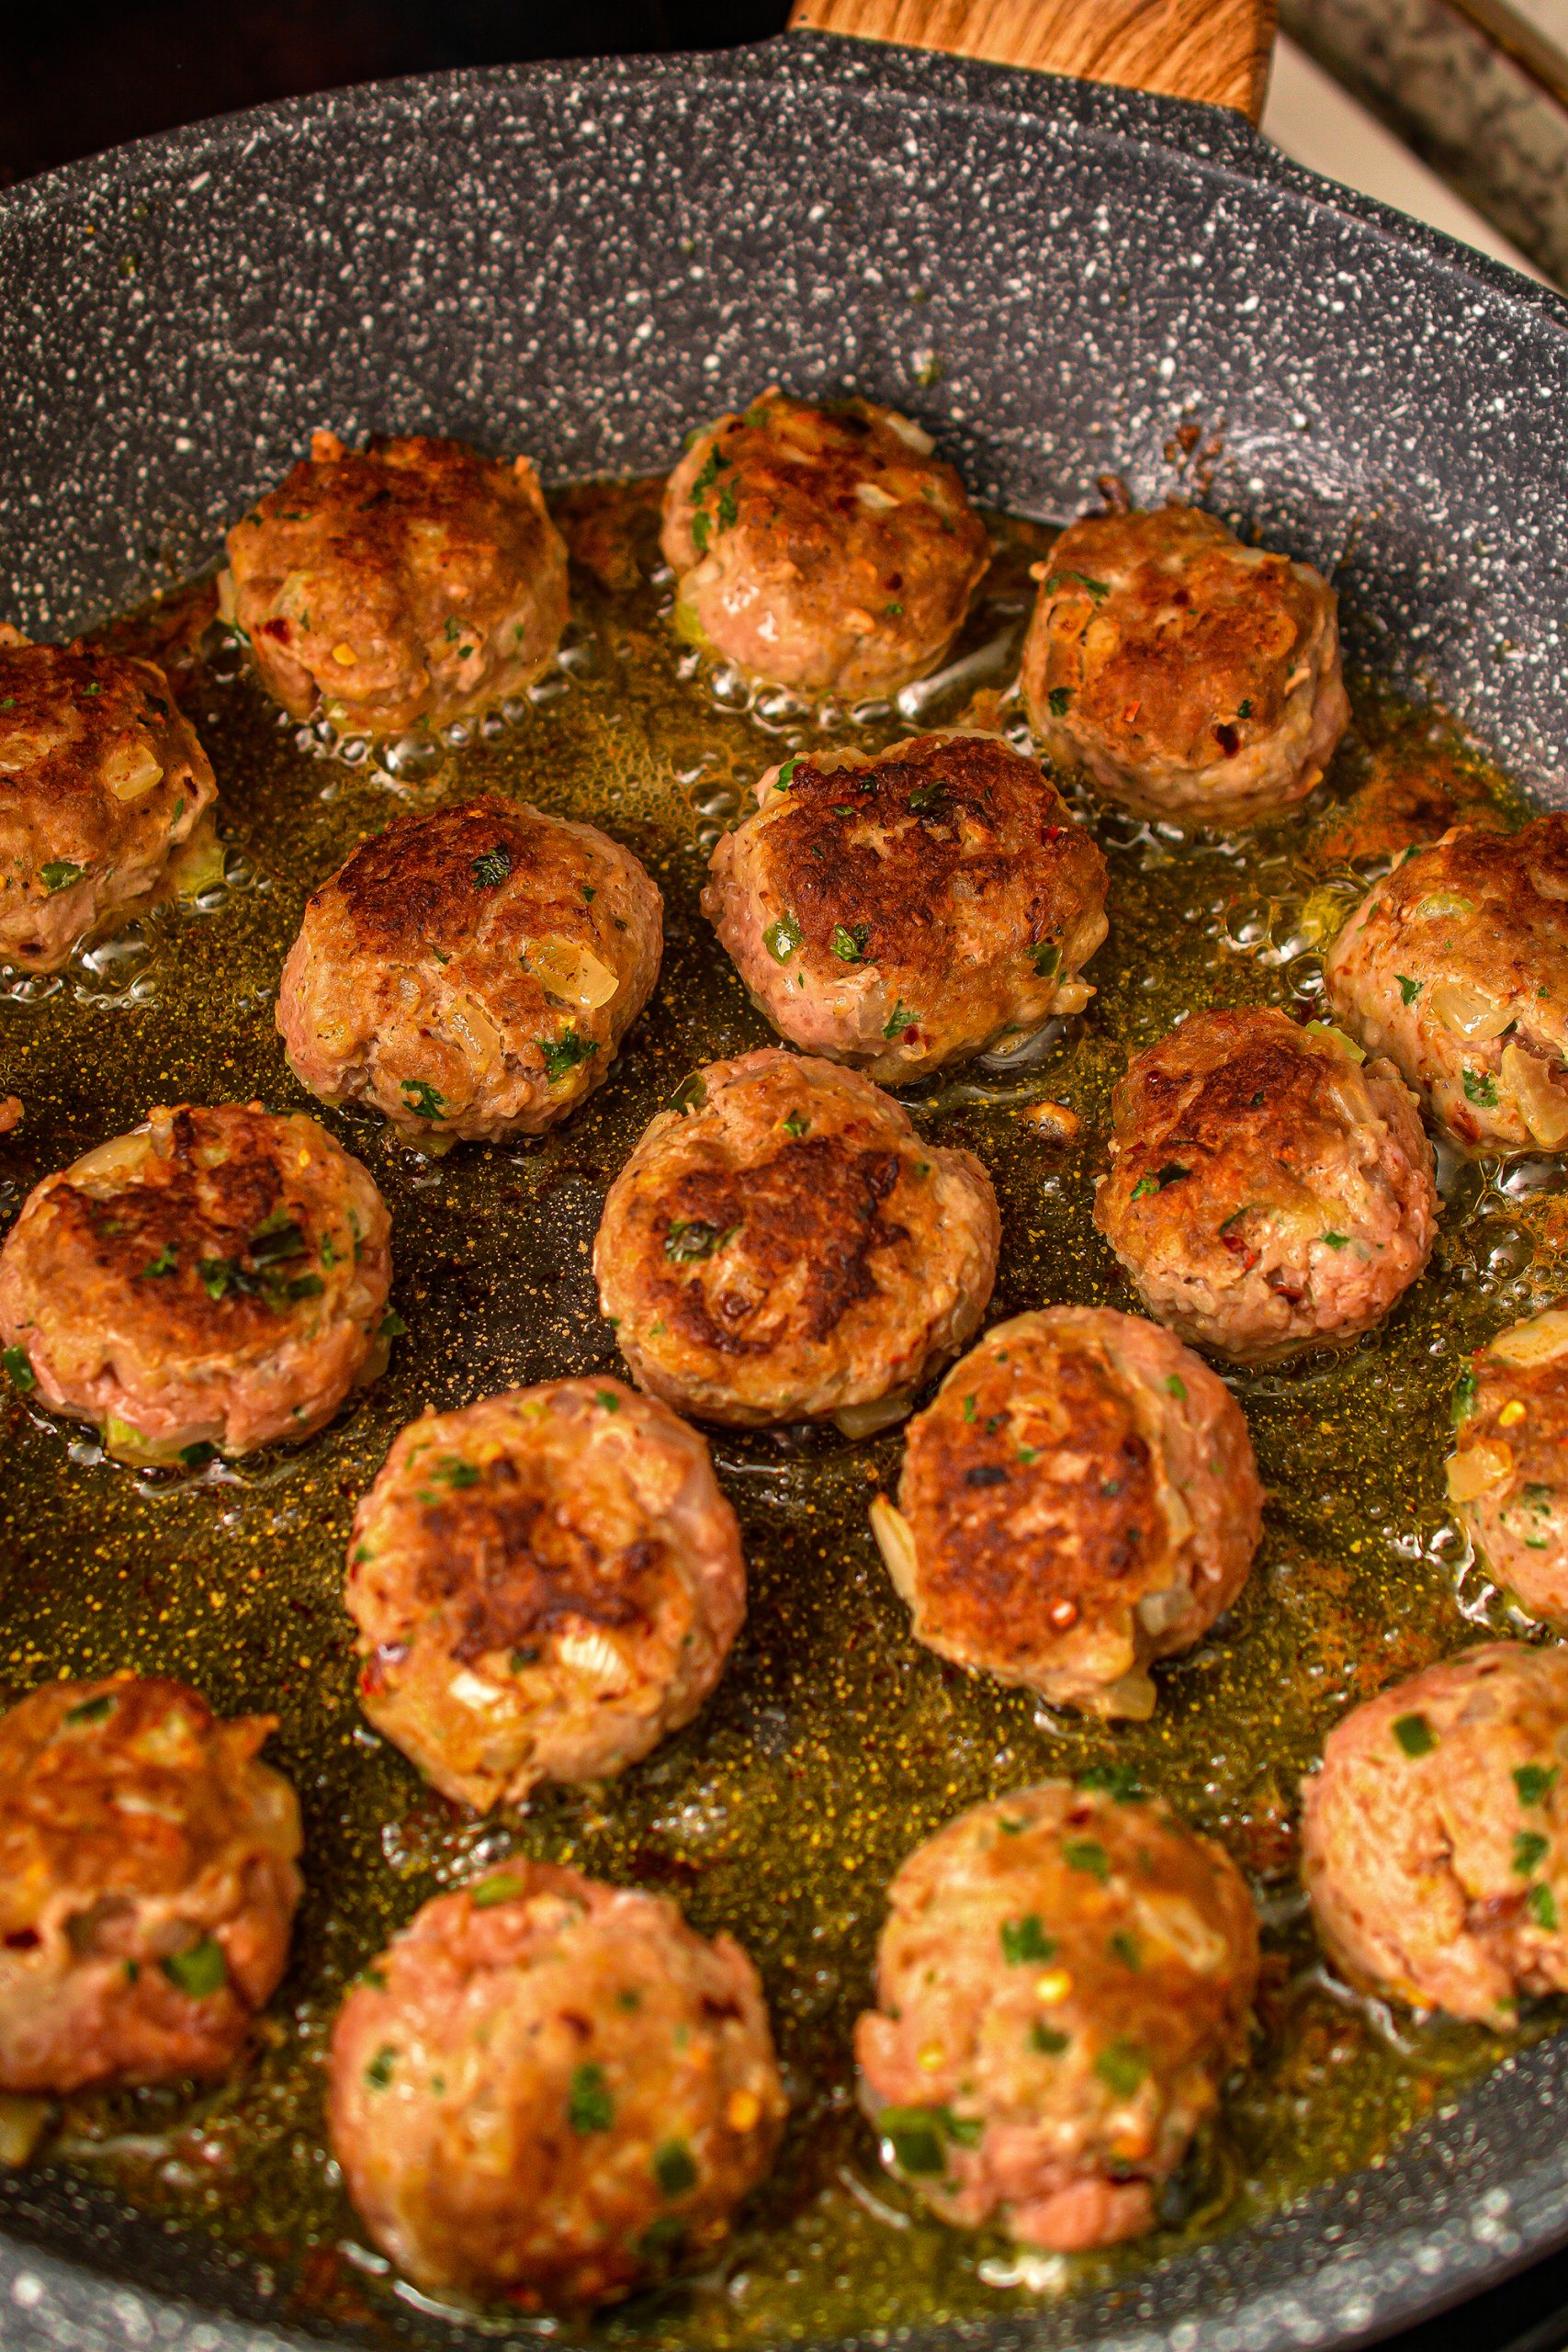 Heat the remaining oil in a skillet over medium high heat and brown the meatballs evenly on all sides.